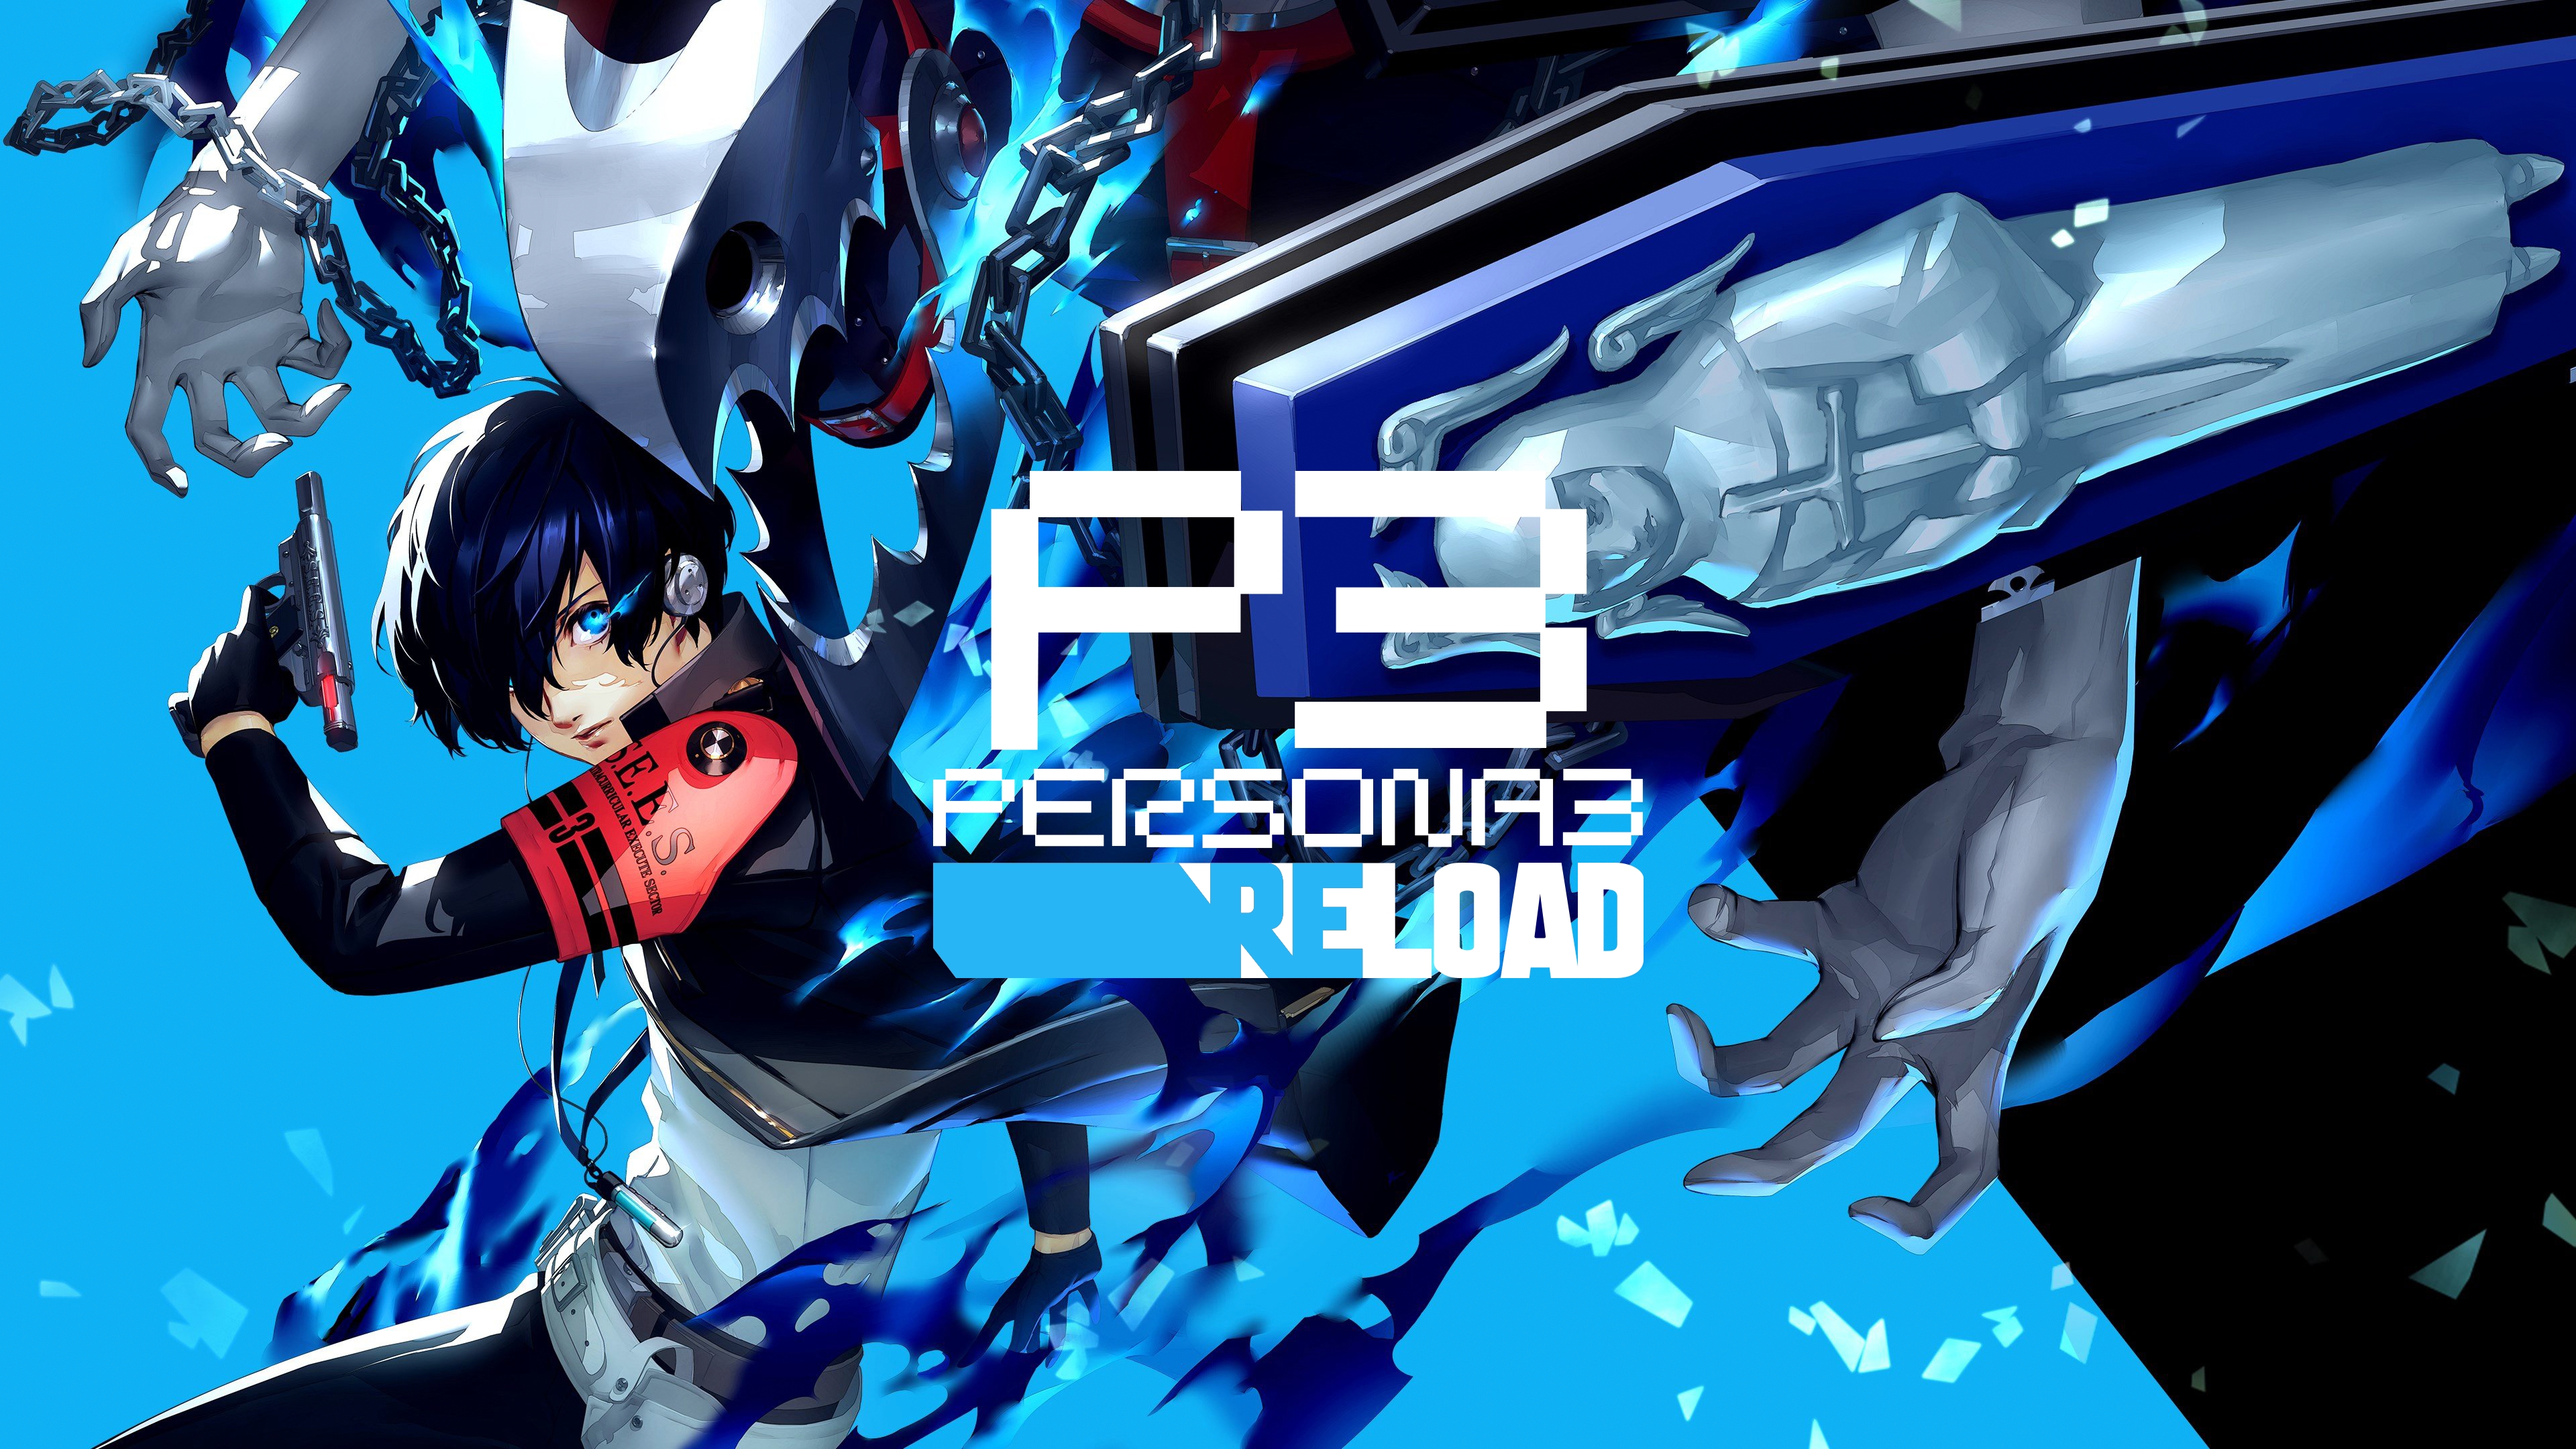 https://gaming-cdn.com/images/products/14279/orig/persona-3-reload-pc-game-steam-europe-cover.jpg?v=1706873421